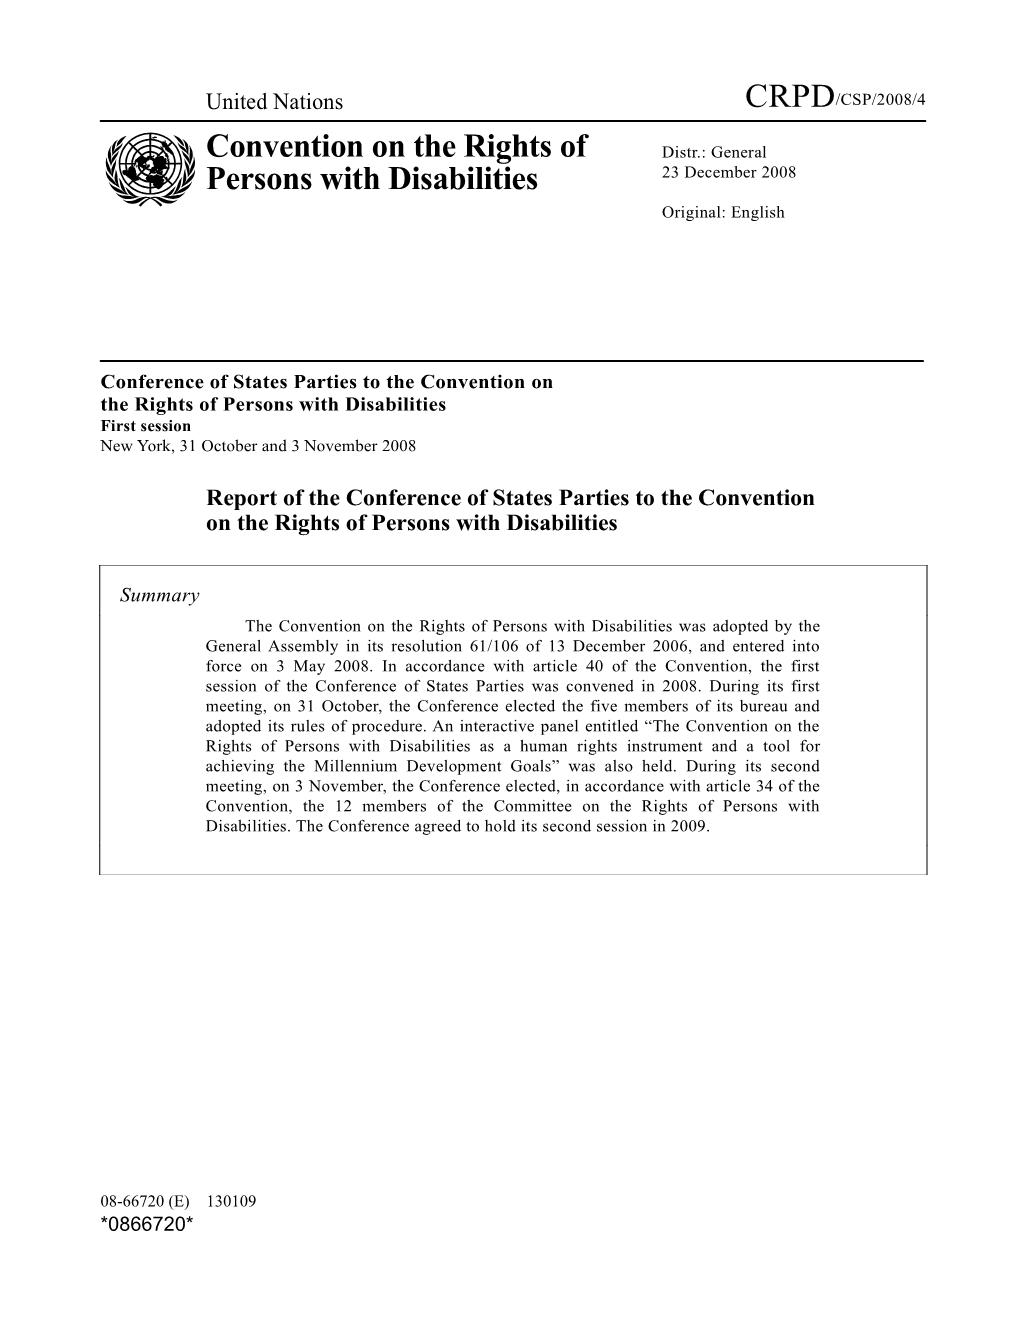 Conference of States Parties to the Convention On